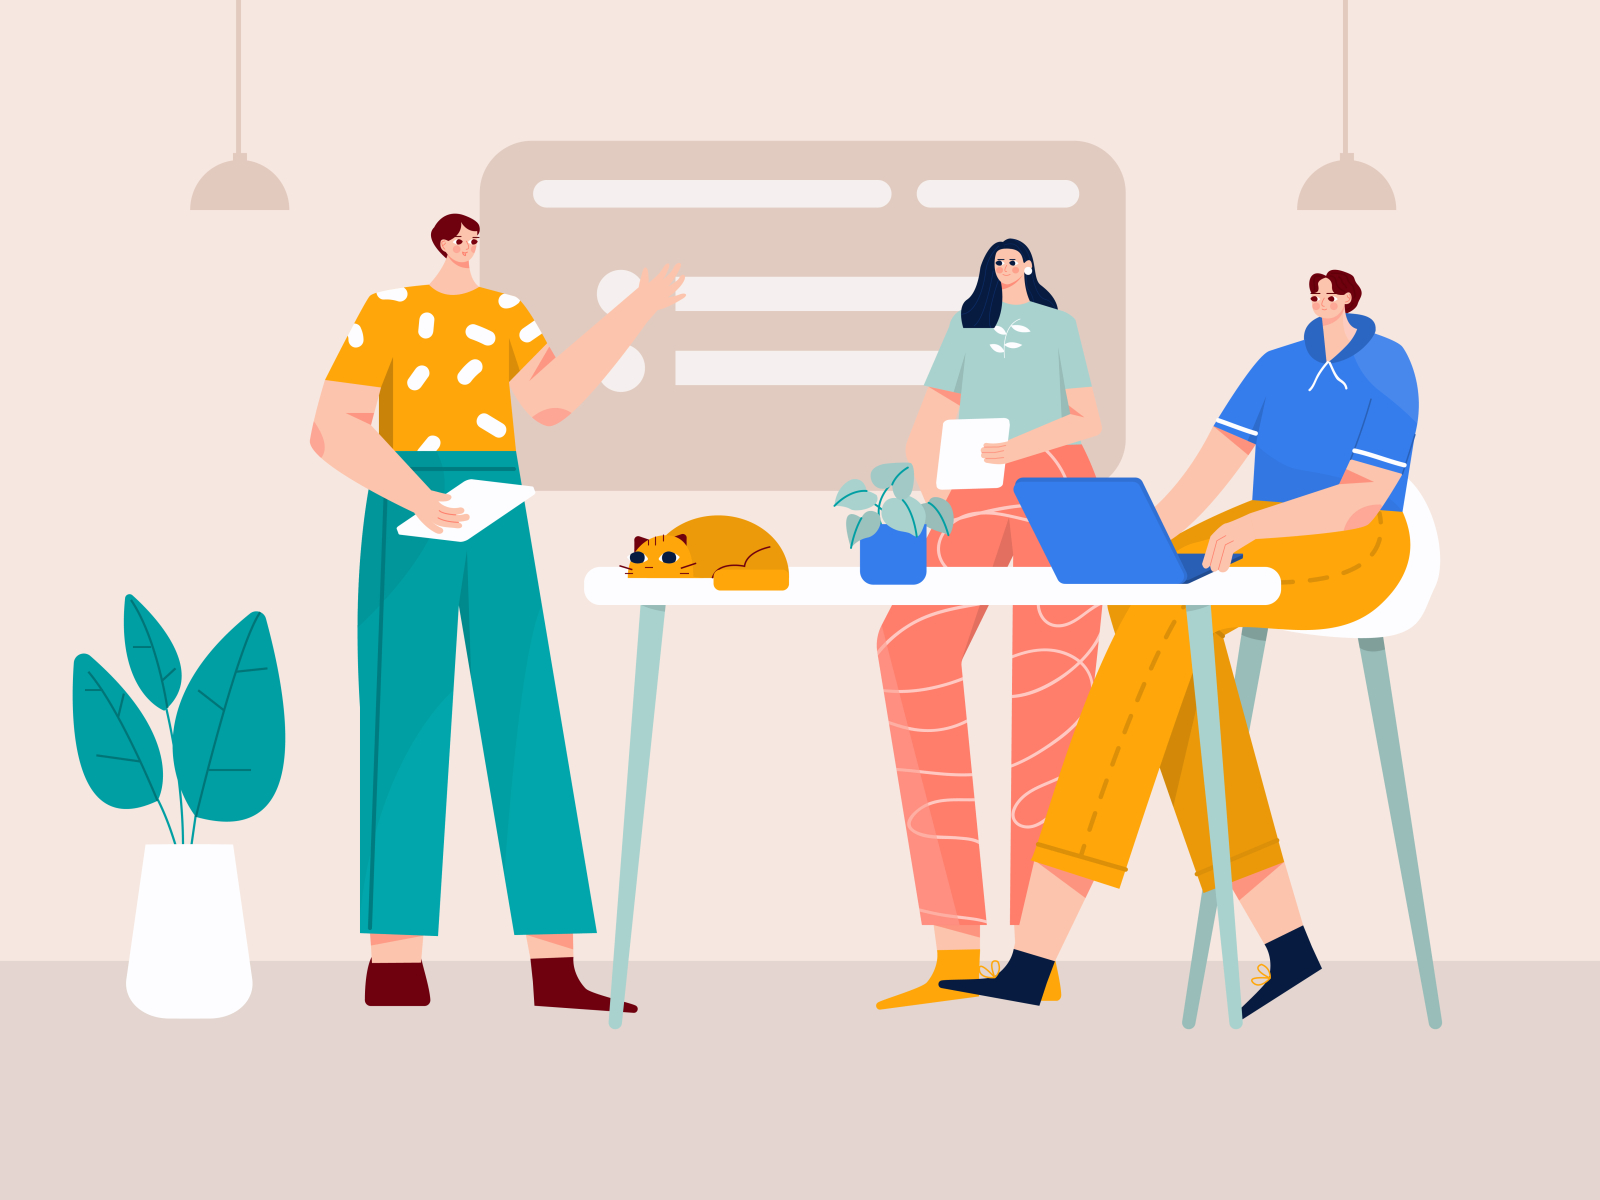 Meeting with the team Illustration b2b illustration business cat character chat illustration conversation flat ilustration illustration meeting plan planning startup team vector woman woman illustration